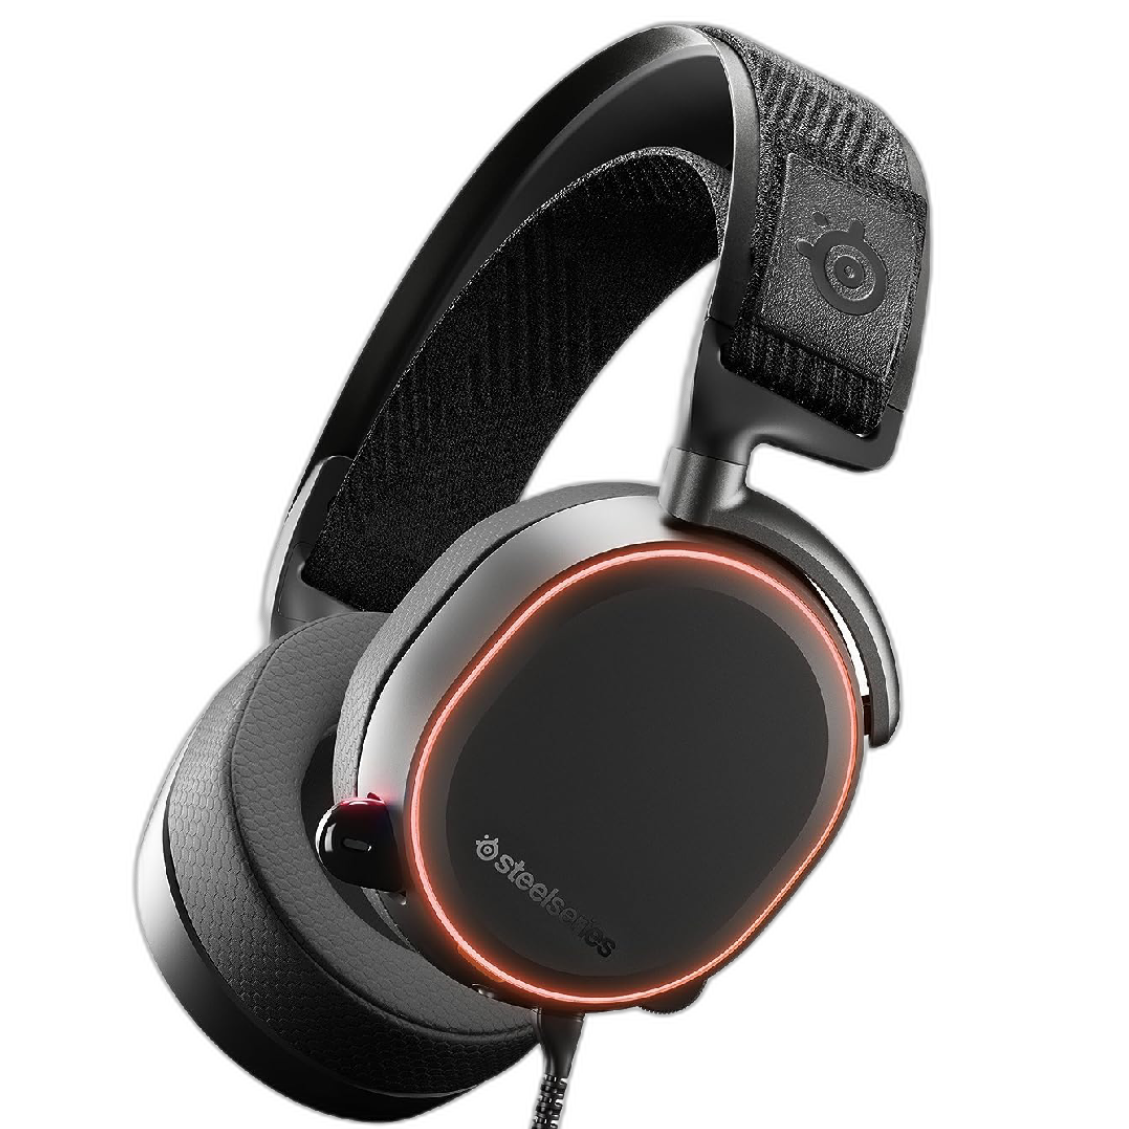 SteelSeries Arctis Pro High Fidelity Gaming Headset positioned at an angle